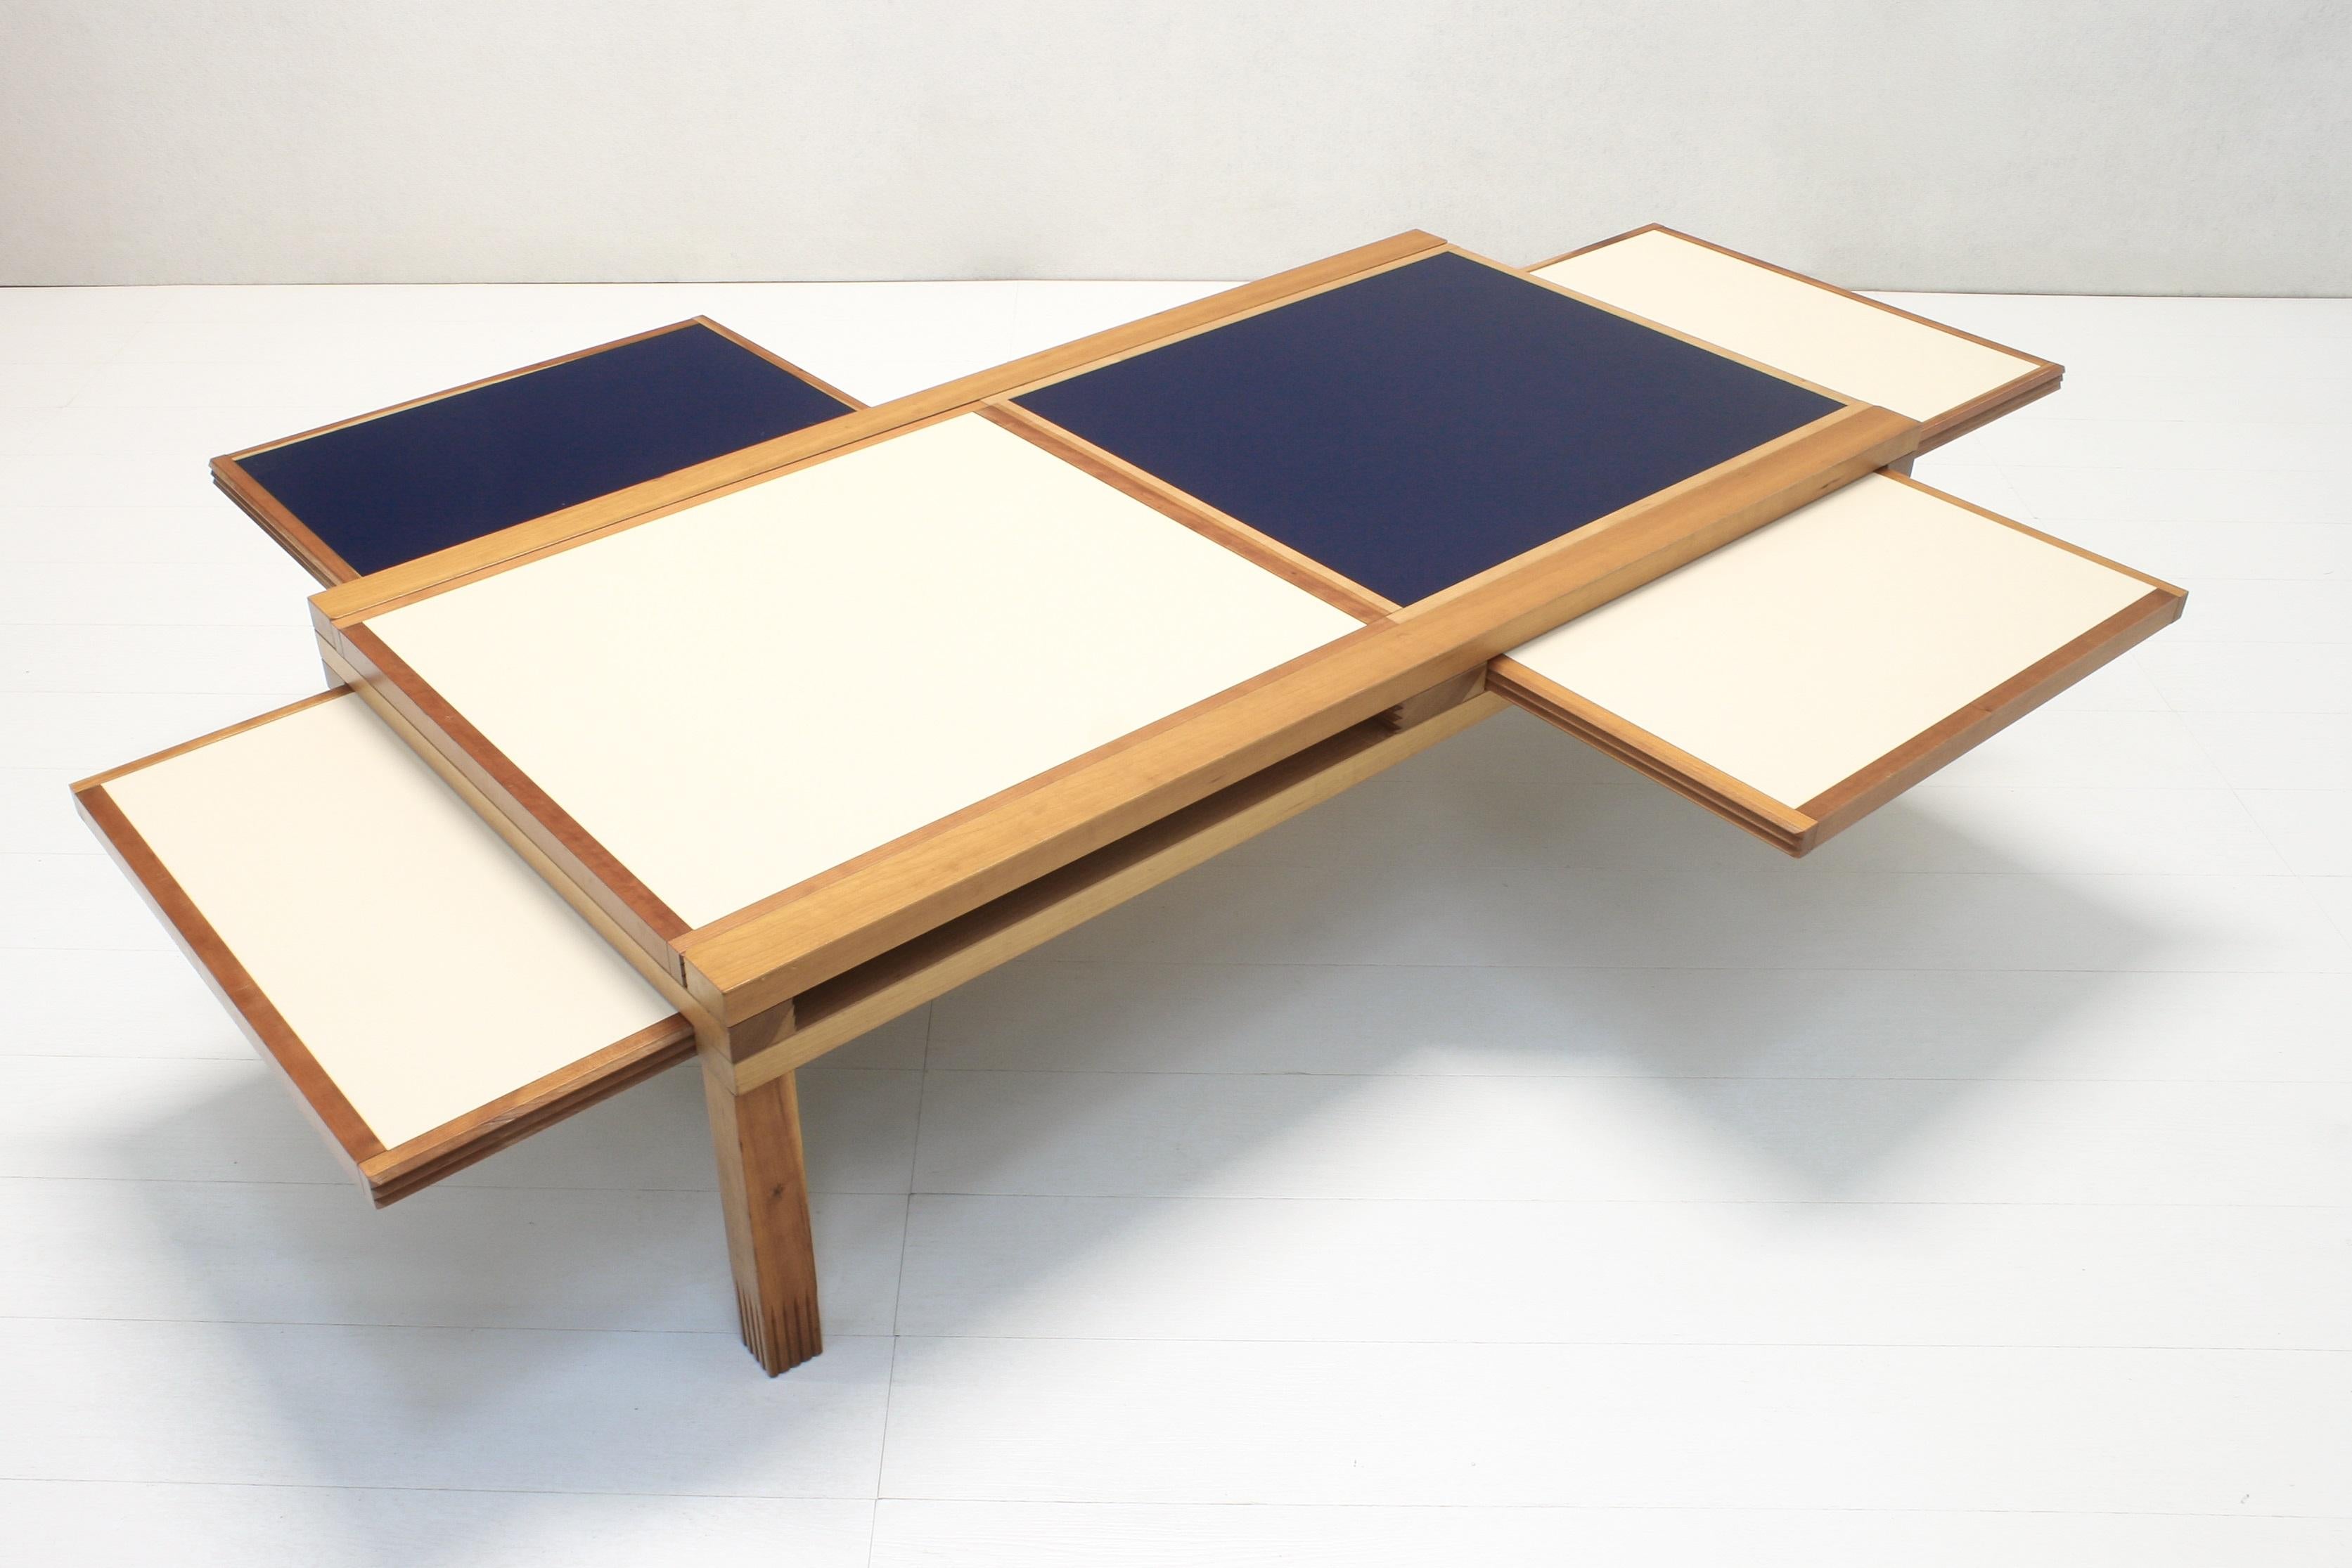 This modular coffee table construction was designed by Bernard Vuarnesson and allows you to create your own composition using the six interchangeable table tops, all with a double coloured surface, off-white and deep blue.